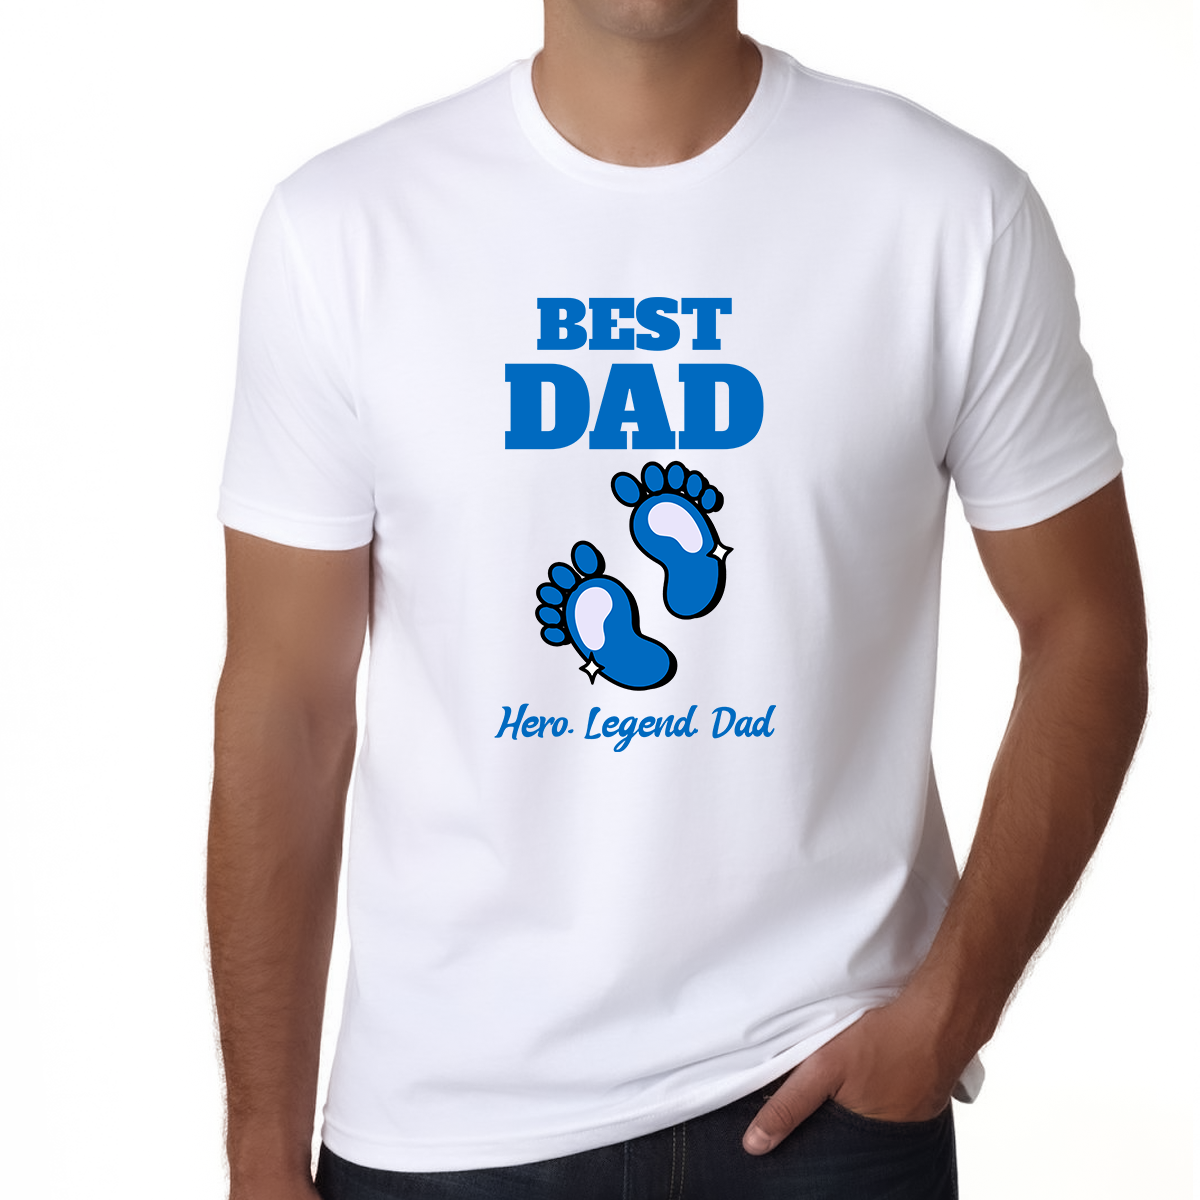 First Fathers Day Shirt Papa Shirt Fathers Day Shirt Gifts for Dads Dad Shirts